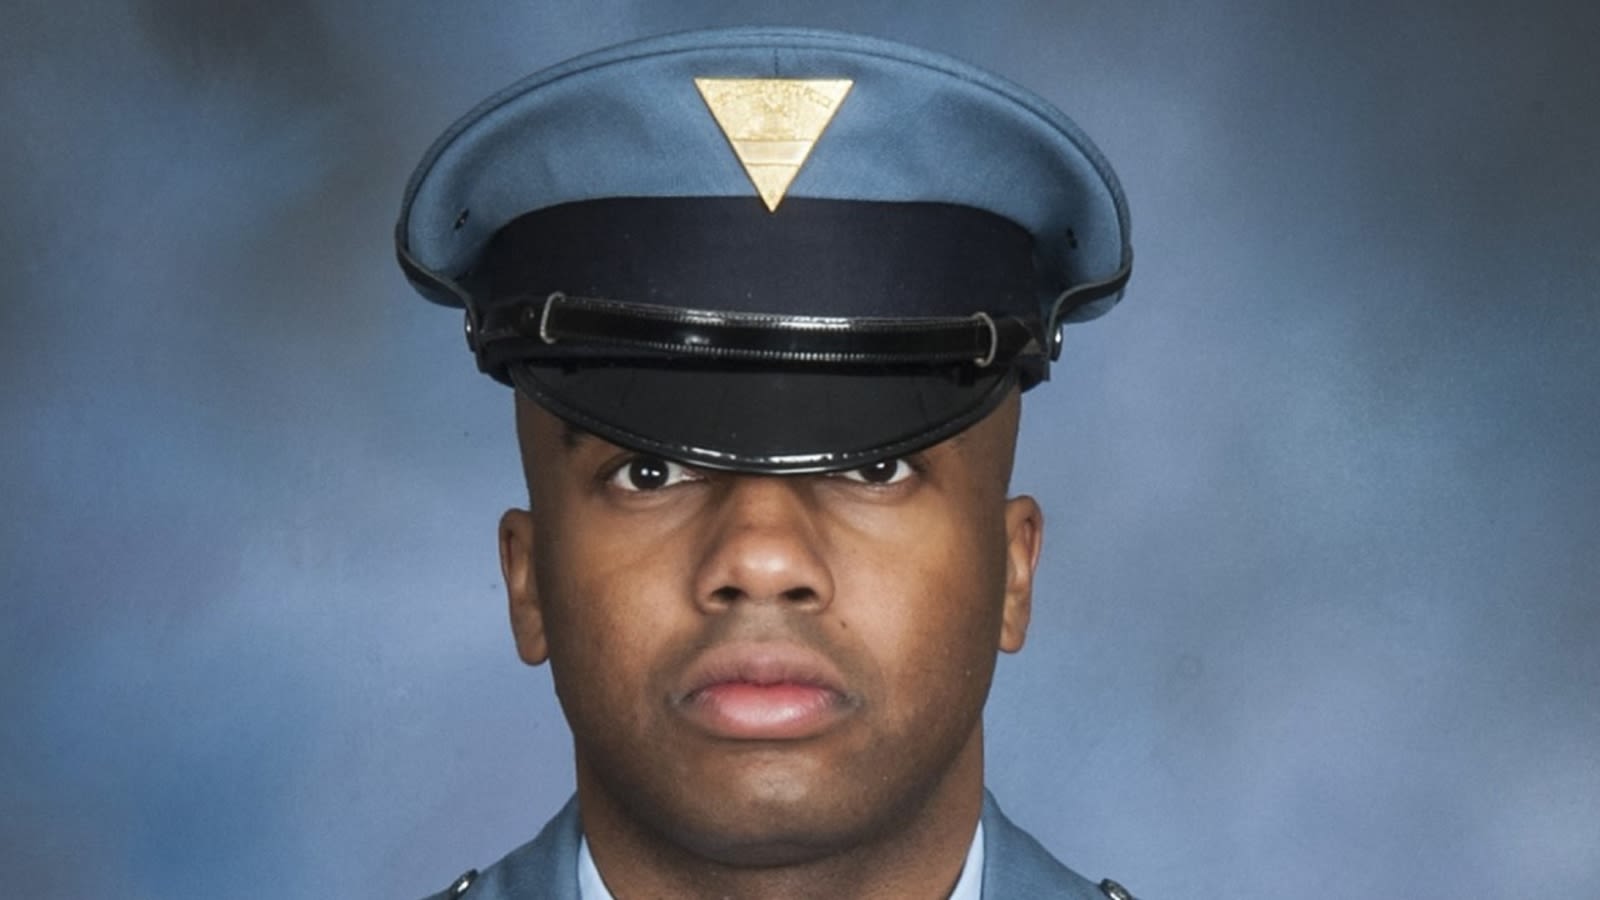 New Jersey state trooper dies during training, officials report